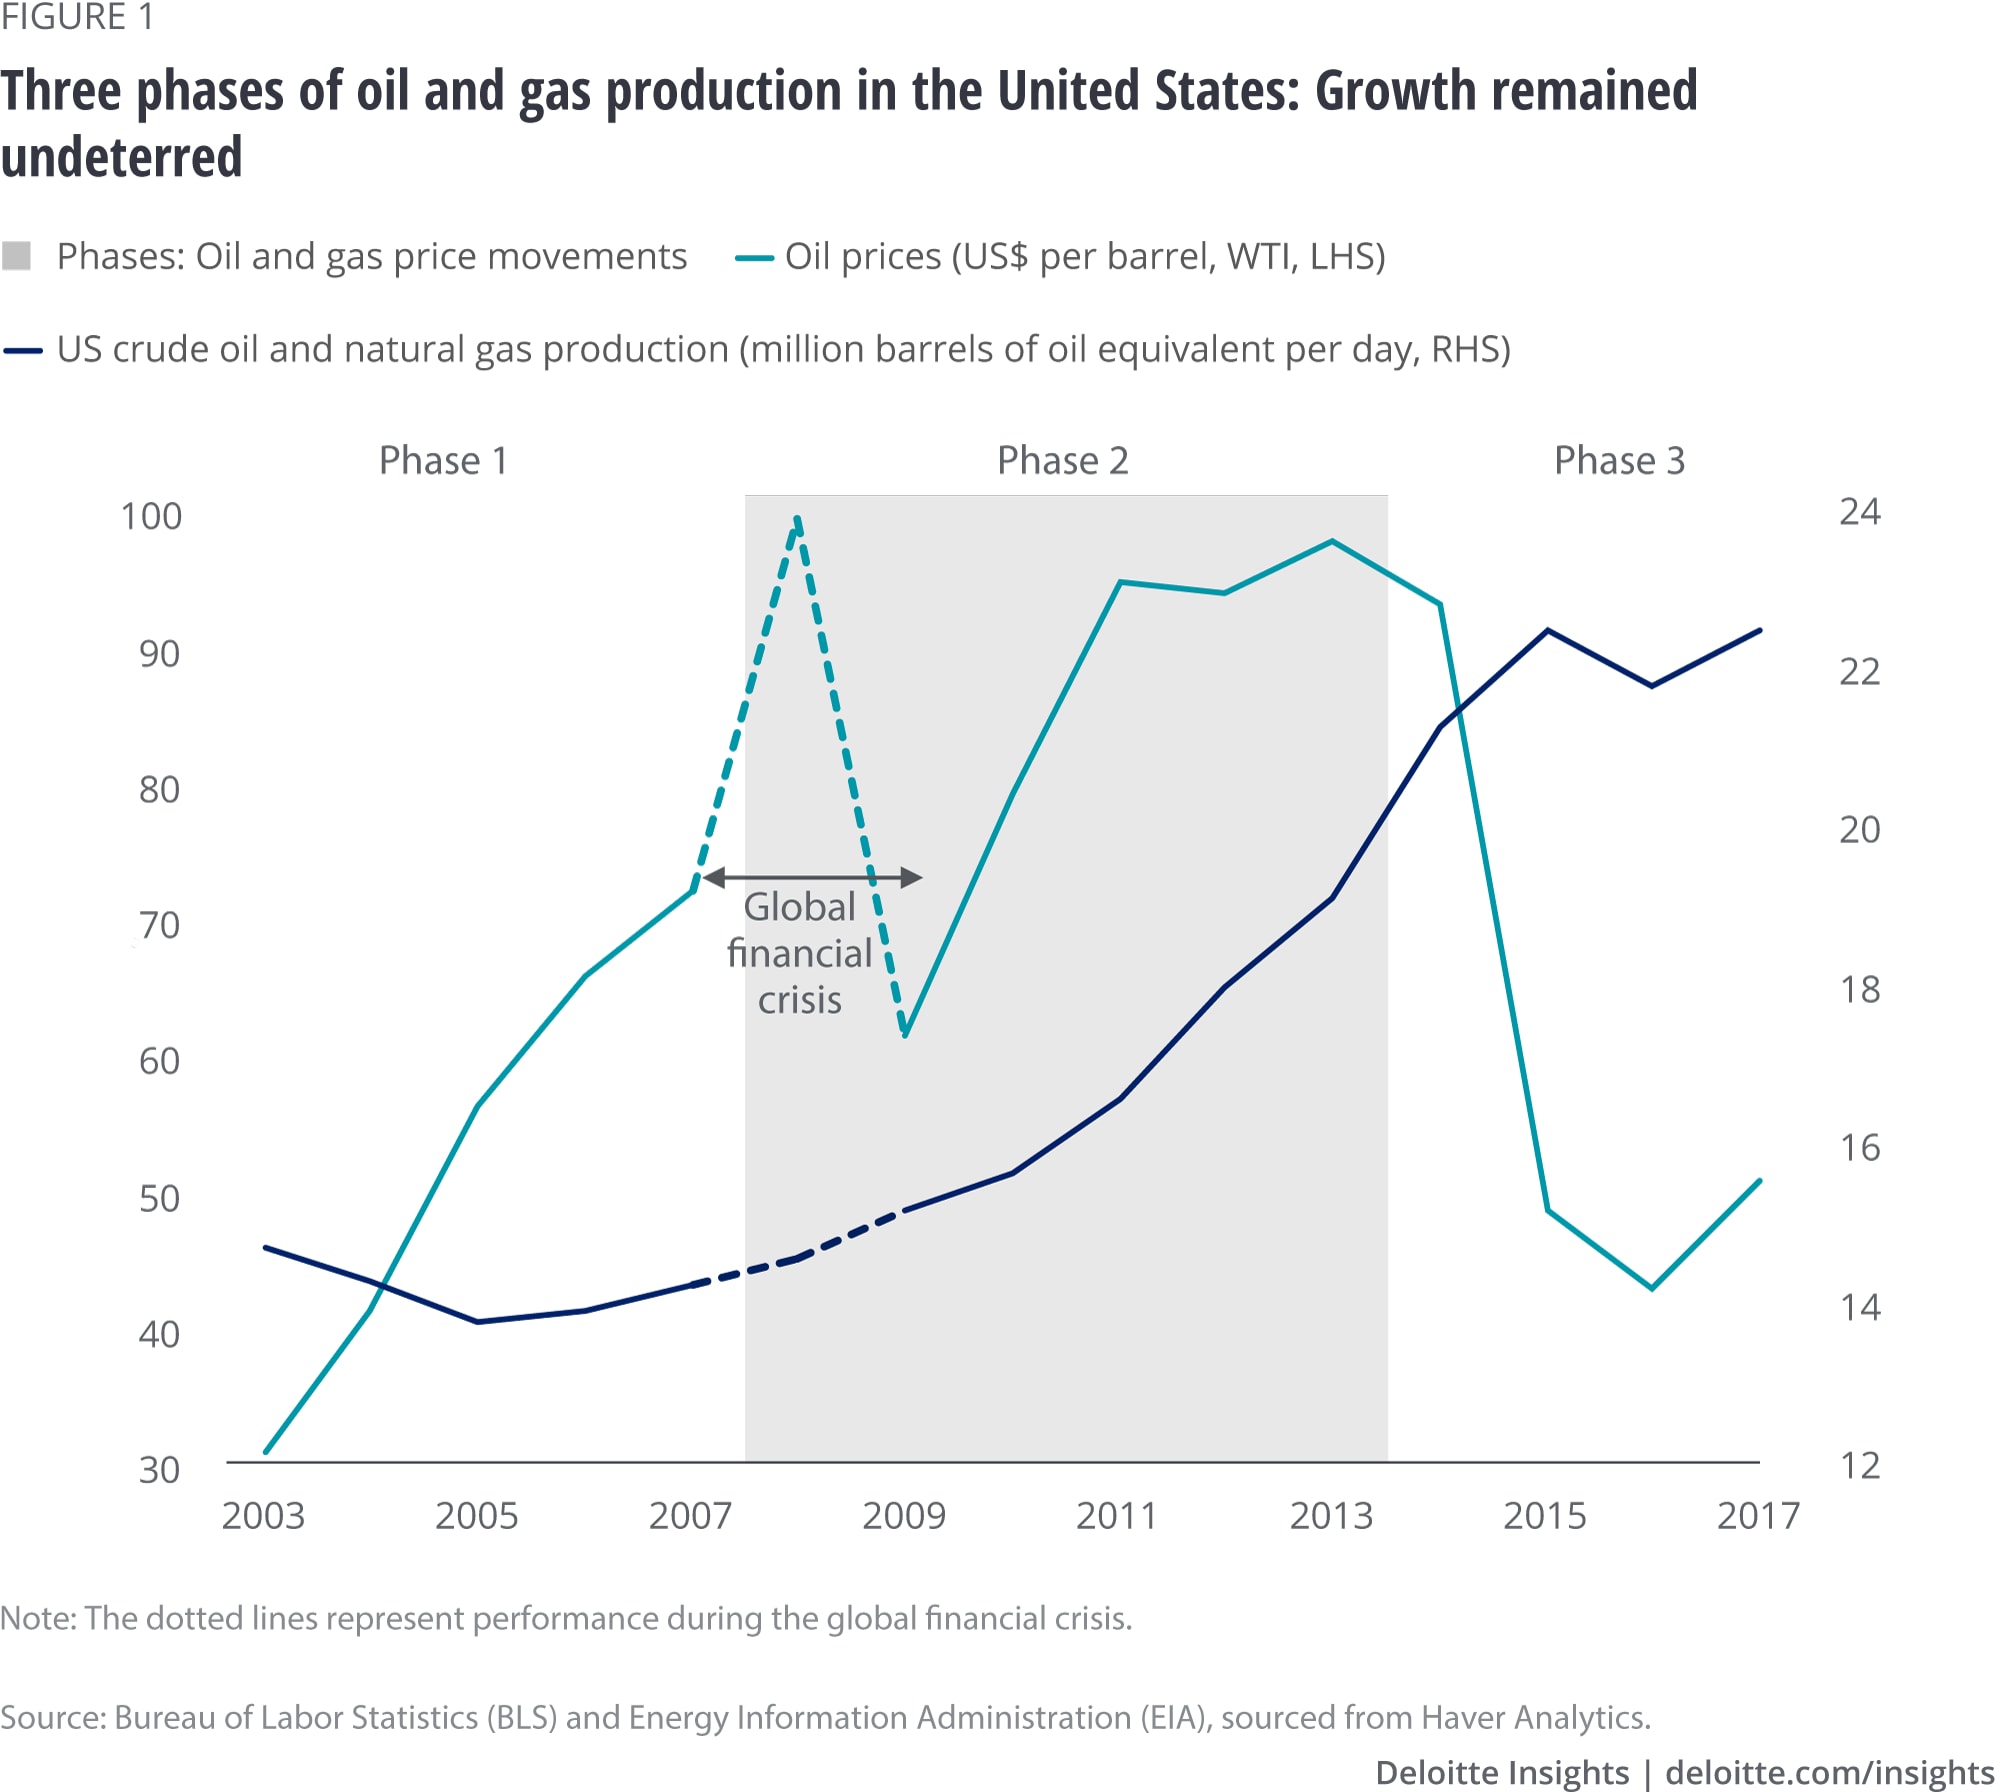 Three phases of oil and gas production in the United States: Growth remained undeterred